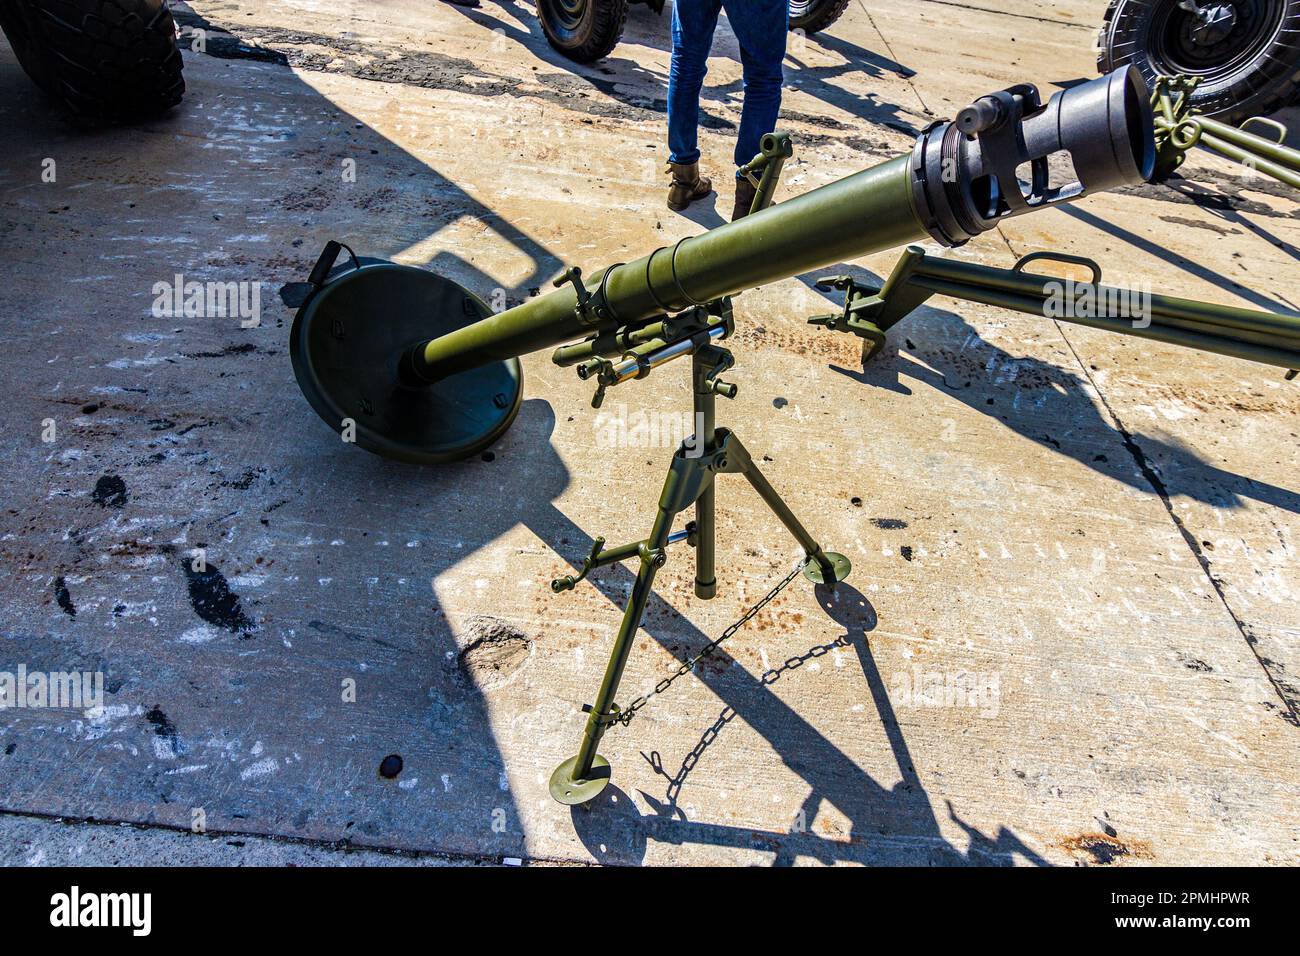 82-mm mortar complex 2B14 Podnos of the Russian army at the exhibition in Zhukovsky Stock Photo